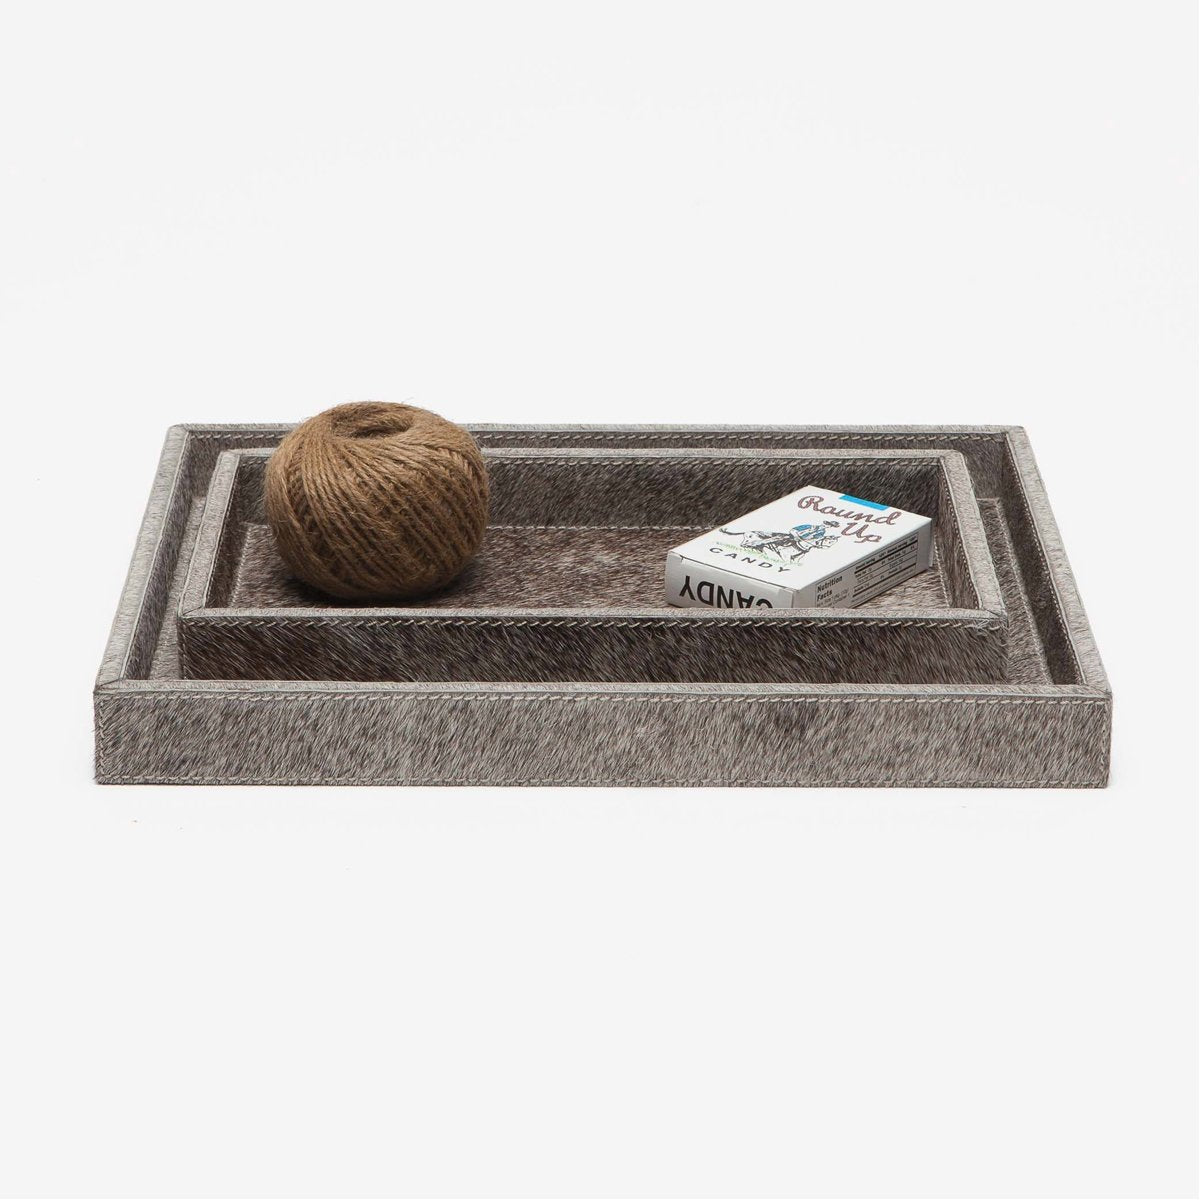 Pigeon and Poodle Umbra Rectangular Tray - Straight, 2-Piece Set